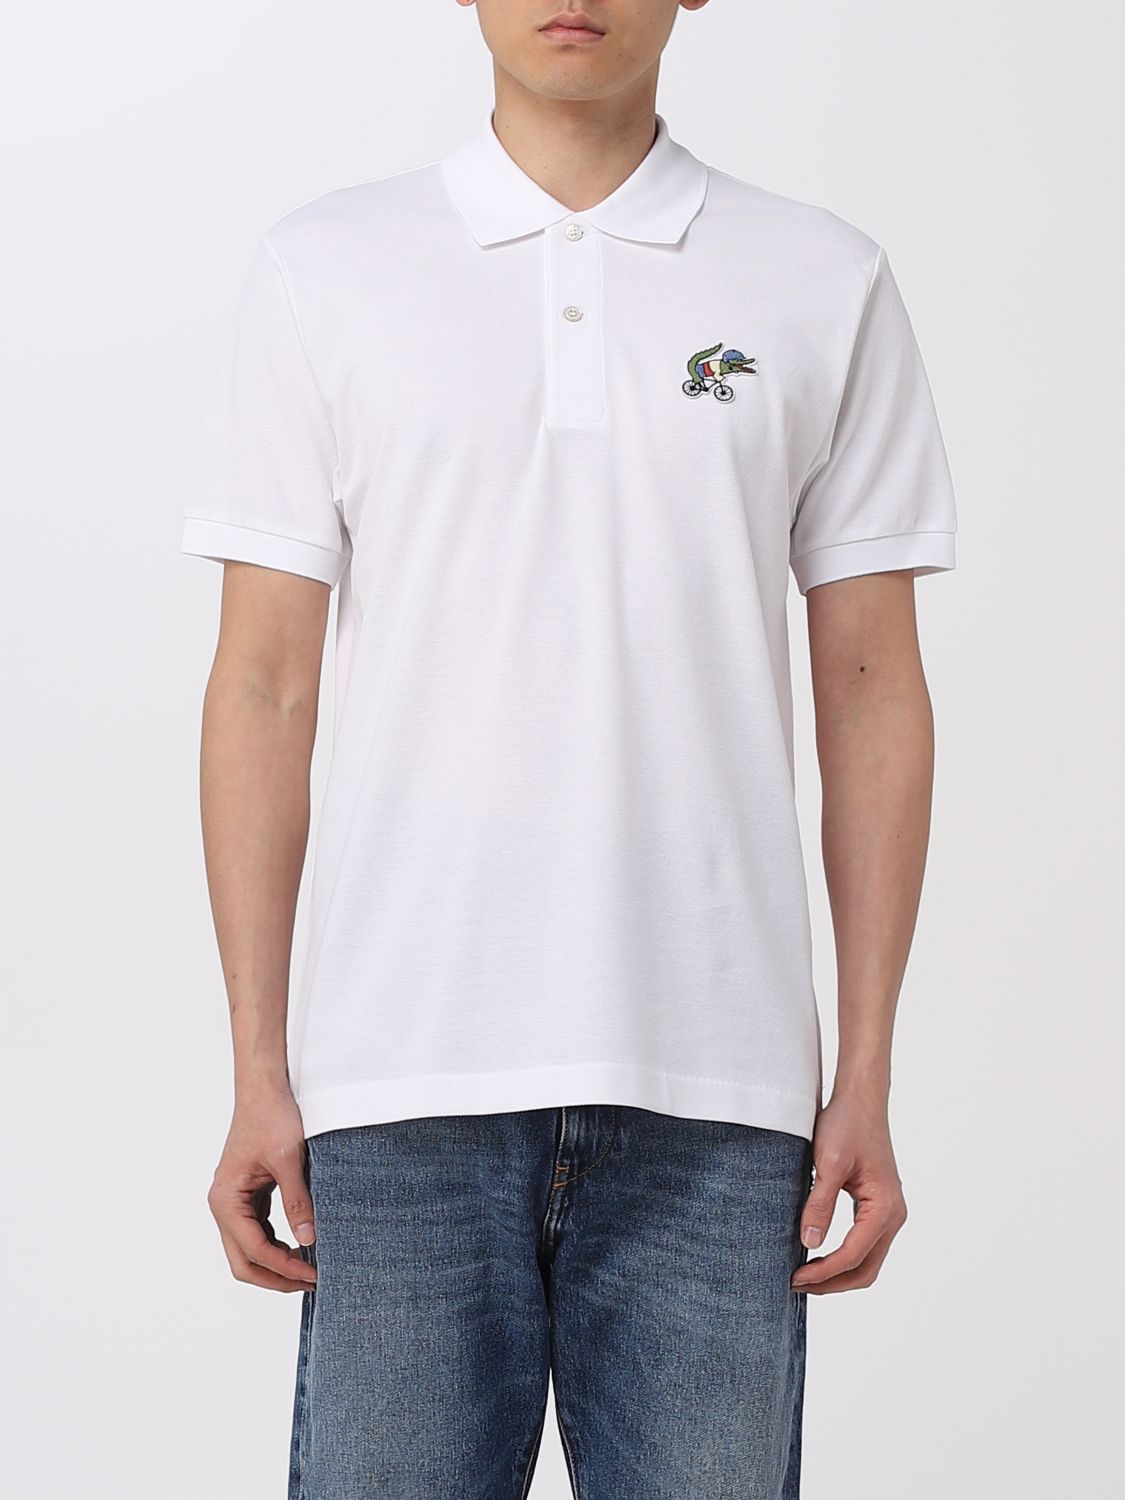 Lacoste X Netflix Outlet: polo shirt for man - White | Lacoste X ...